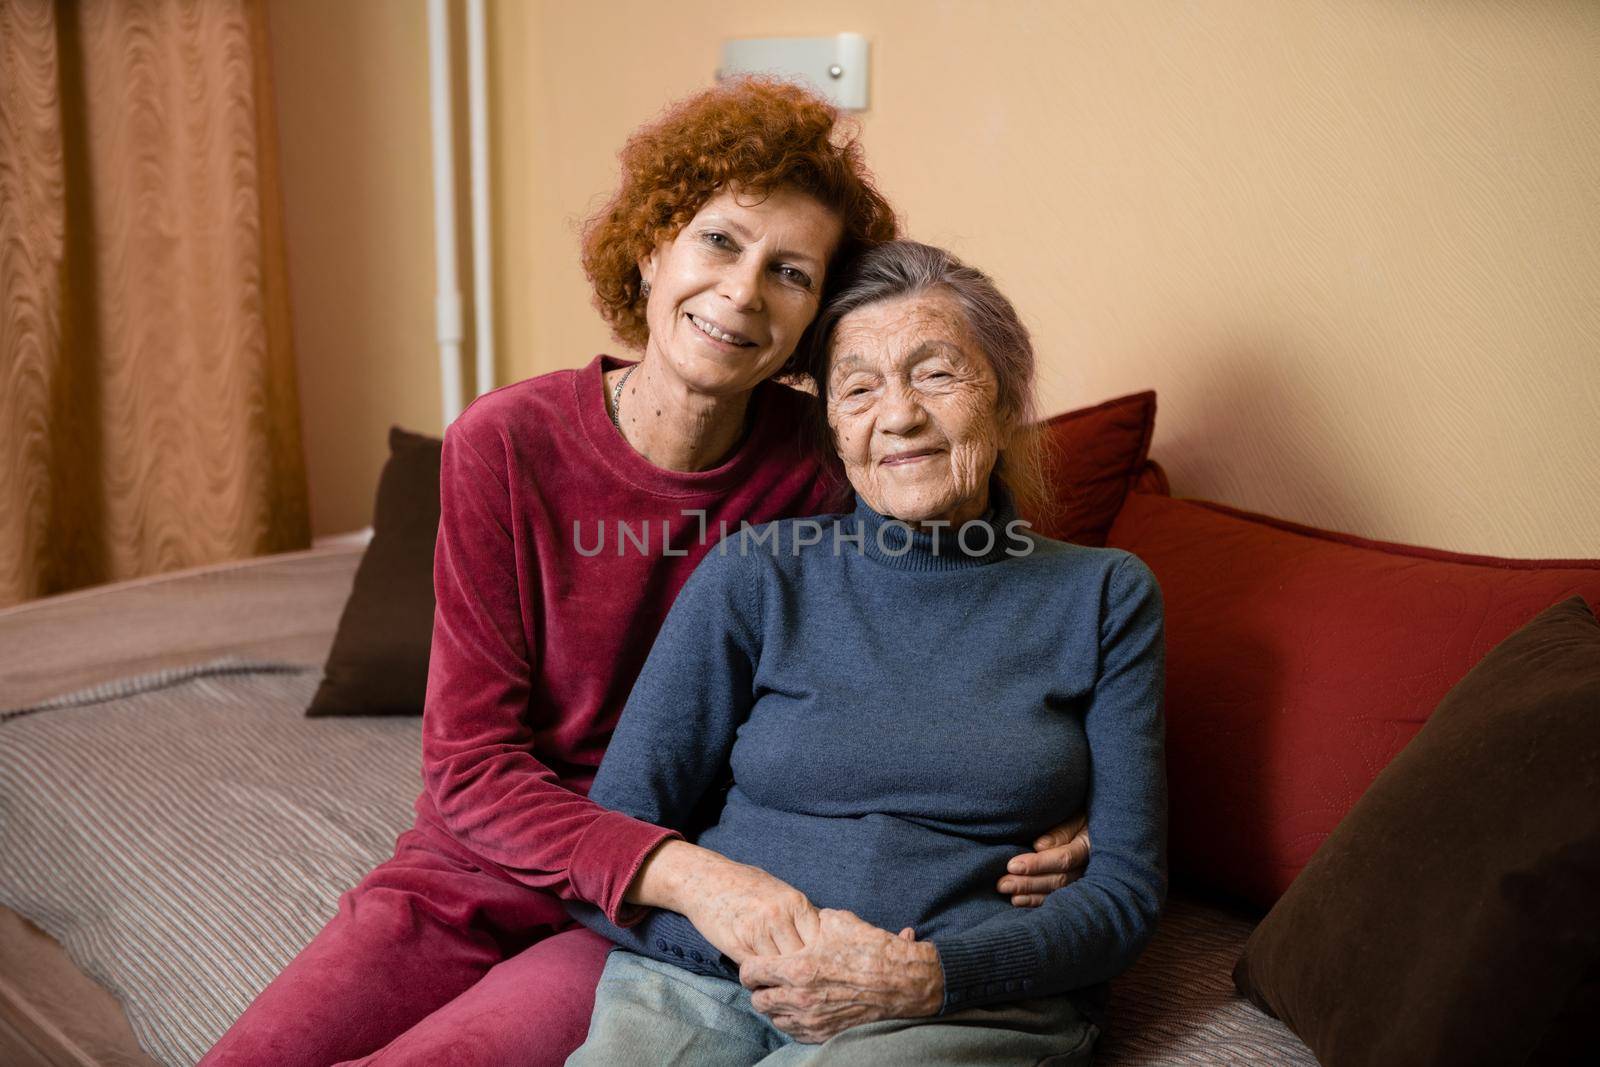 Adult daughter takes care of elderly mother suffering from dementia, old woman ninety years age gray hair and wrinkles on face and sweet kind smile, family idyll caring for elderly, hug each other by Tomashevska